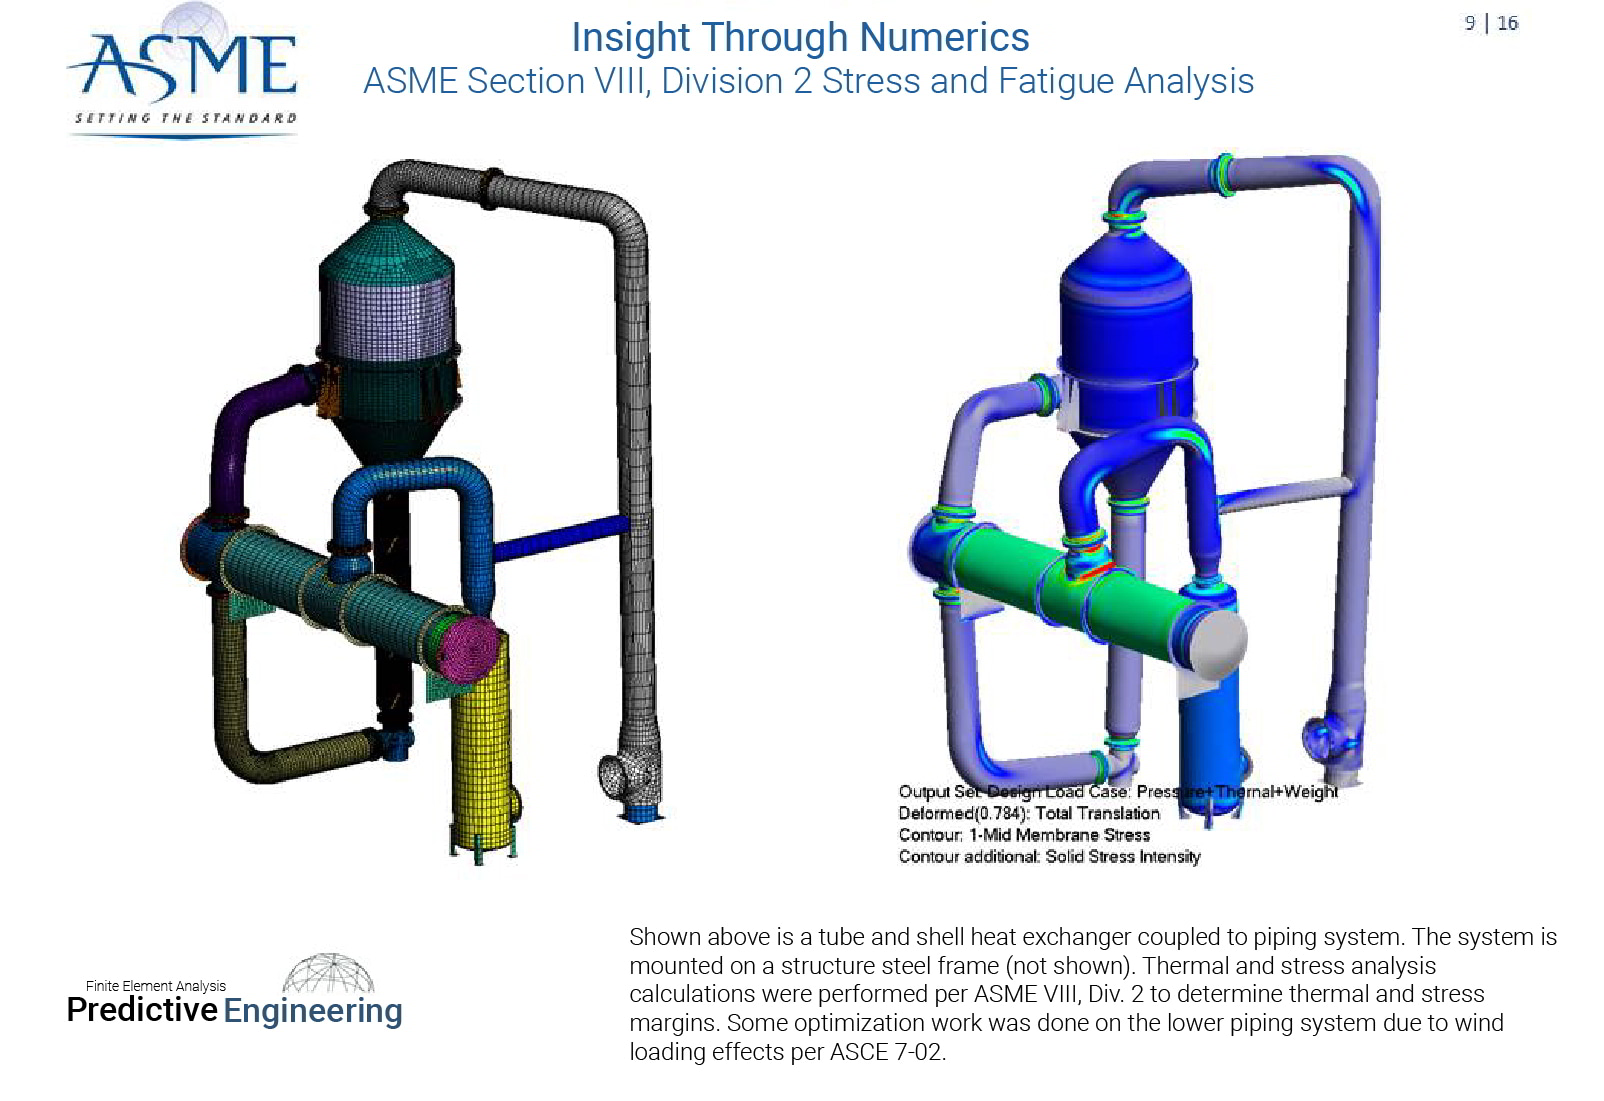 Thermal and stress analysis calculations were performed per ASME VIII, Div. 2 to determine thermal and stress margins - - Predictive Engineering ASME BPVC Pressure Vessel Consulting Services